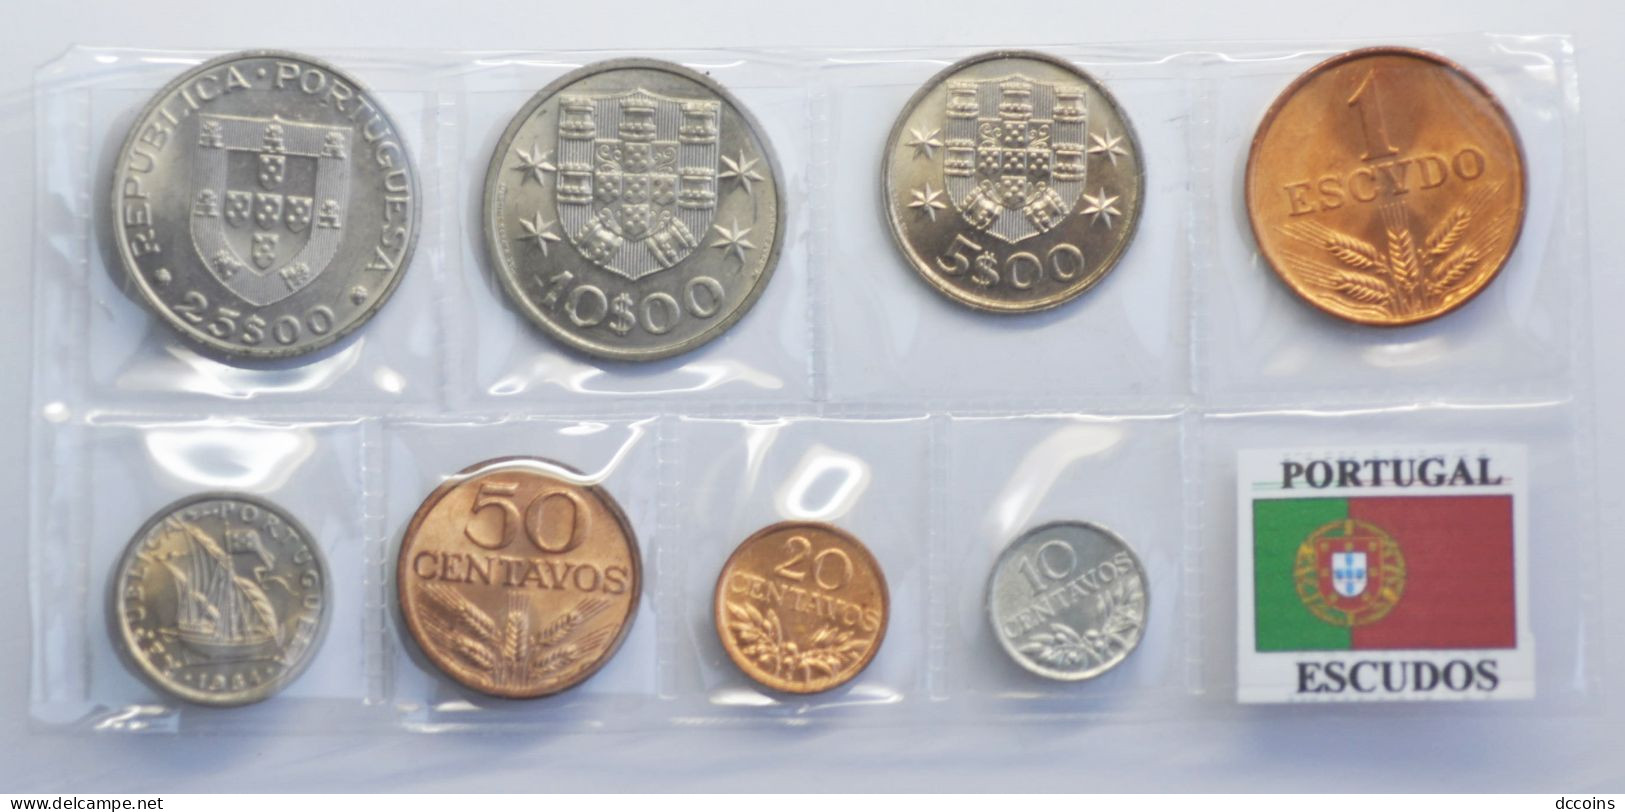 Serie Escudos 8 Coins Uncirculated With Original Color Can Be Different Dates. - Portugal